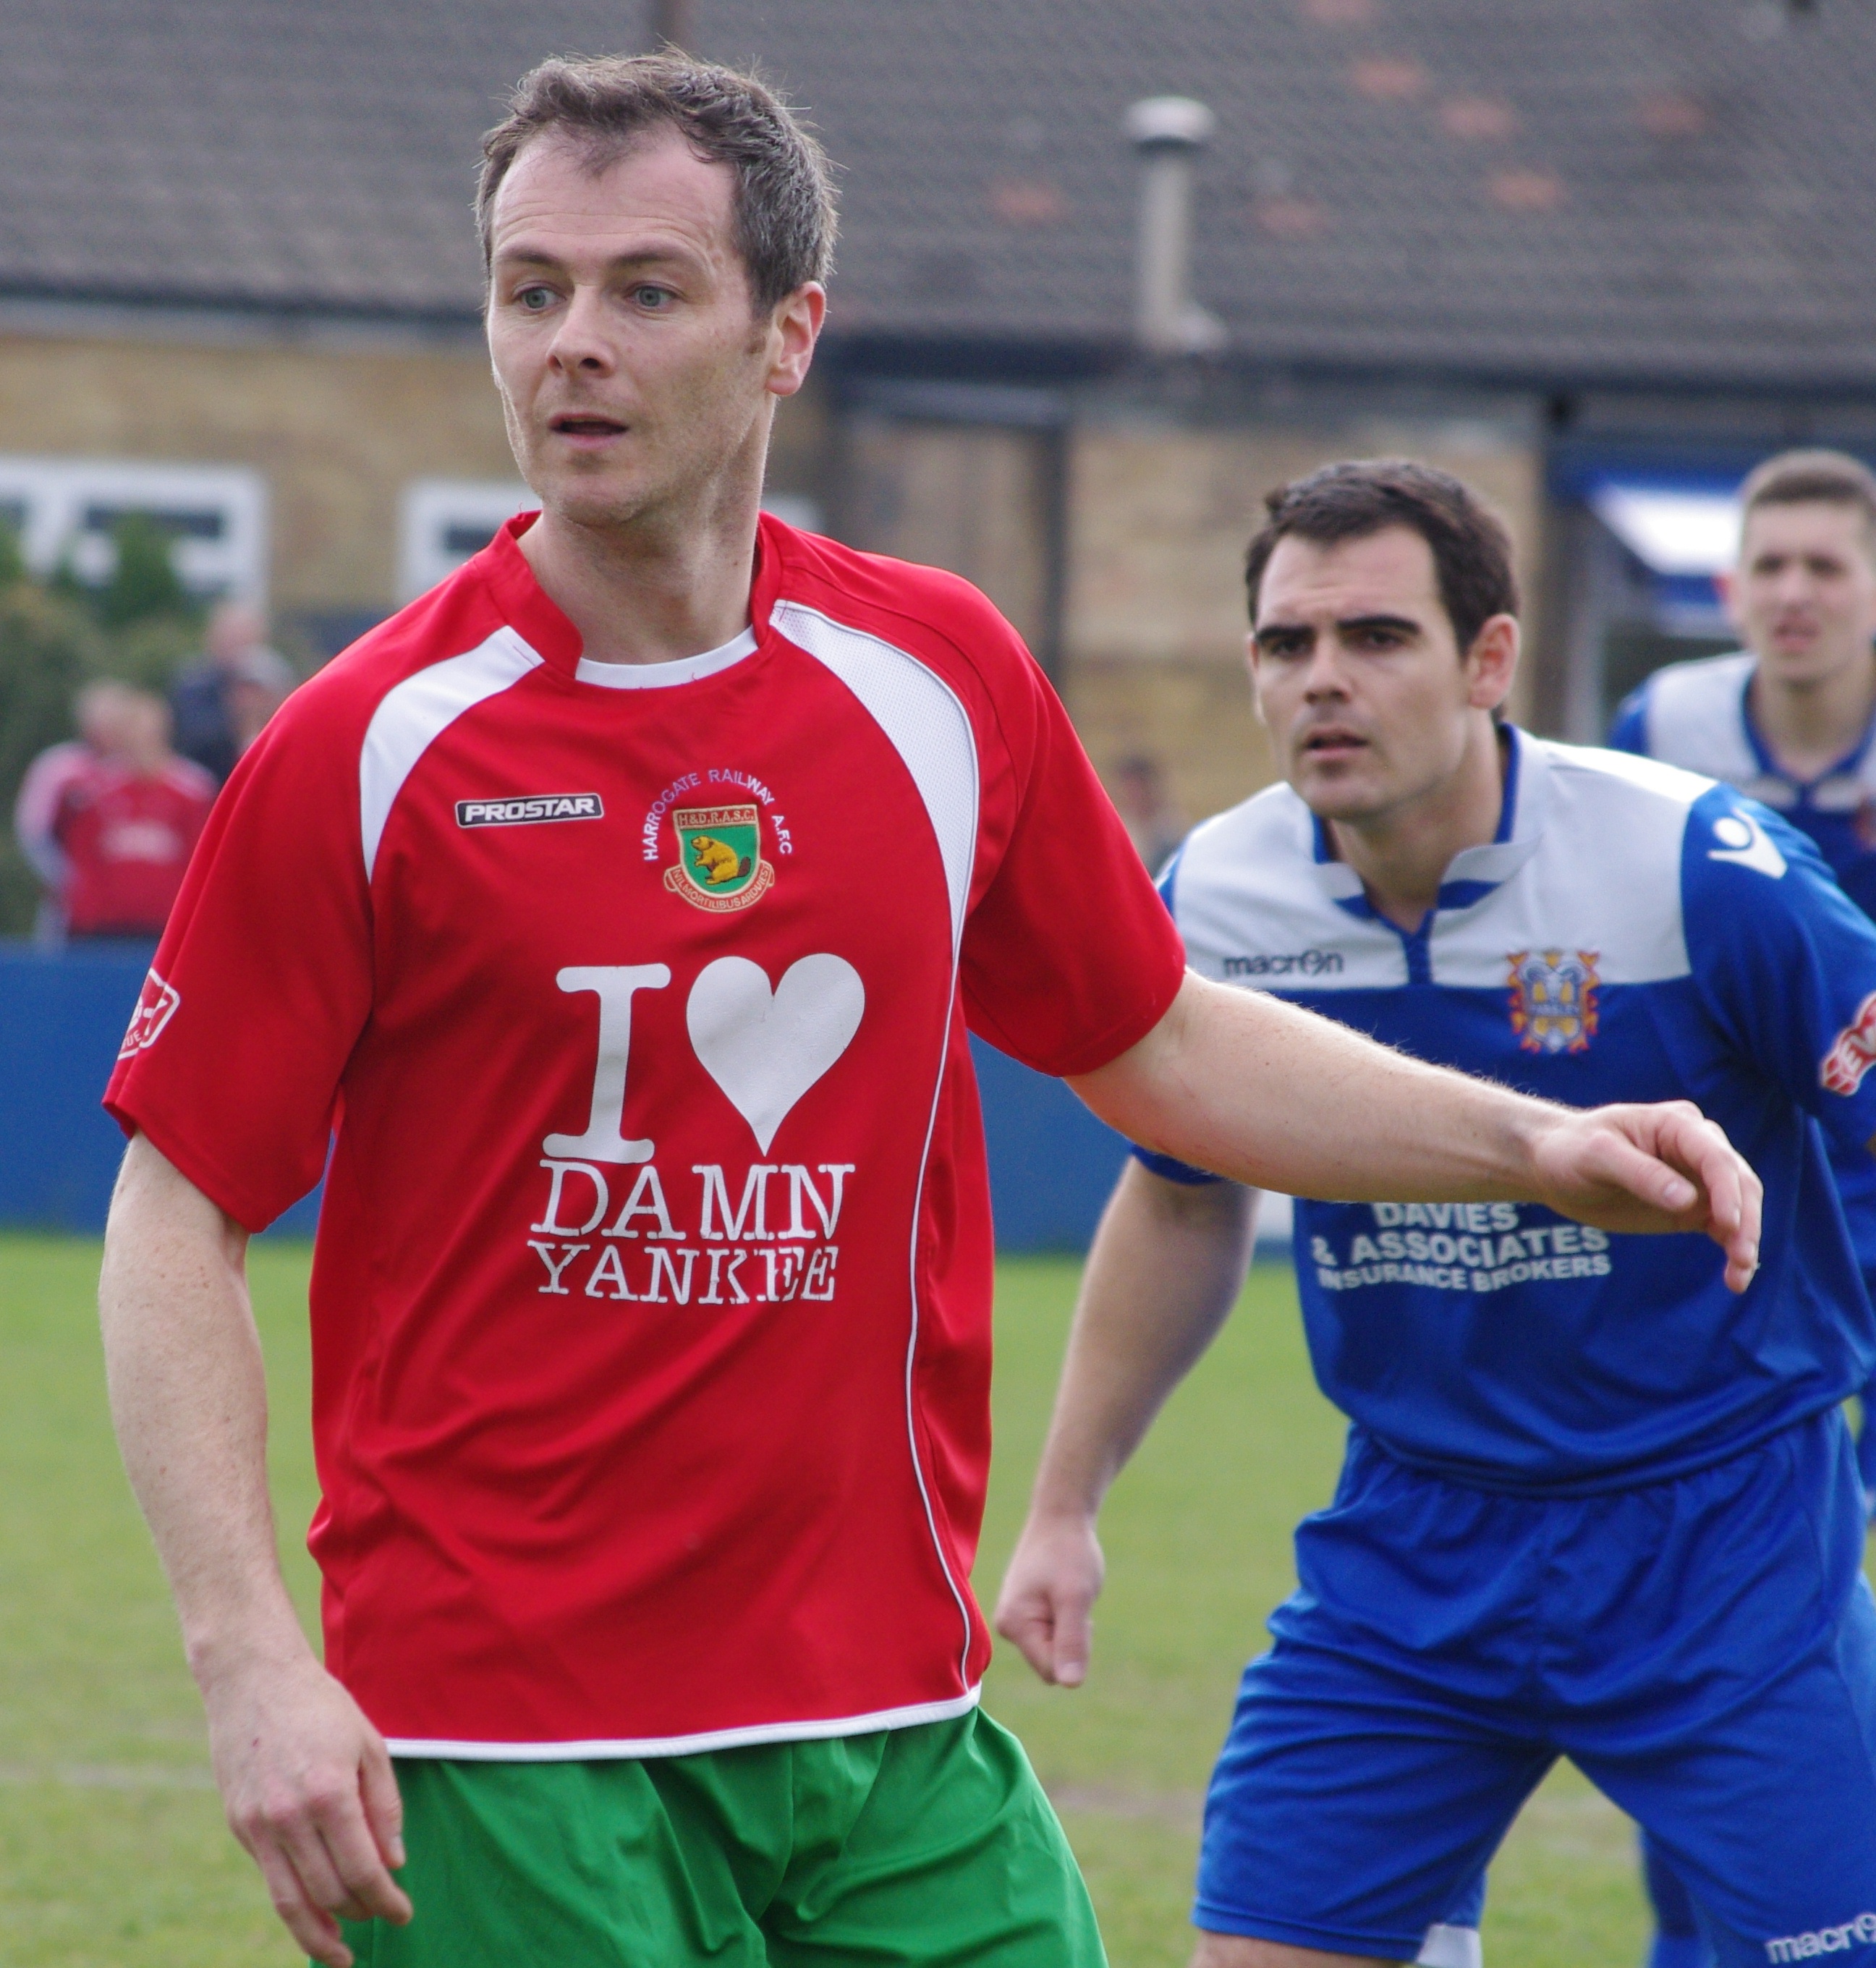 Colin Hunter (left) is set to retire after Harrogate Railway's home game with Warrington tomorrow